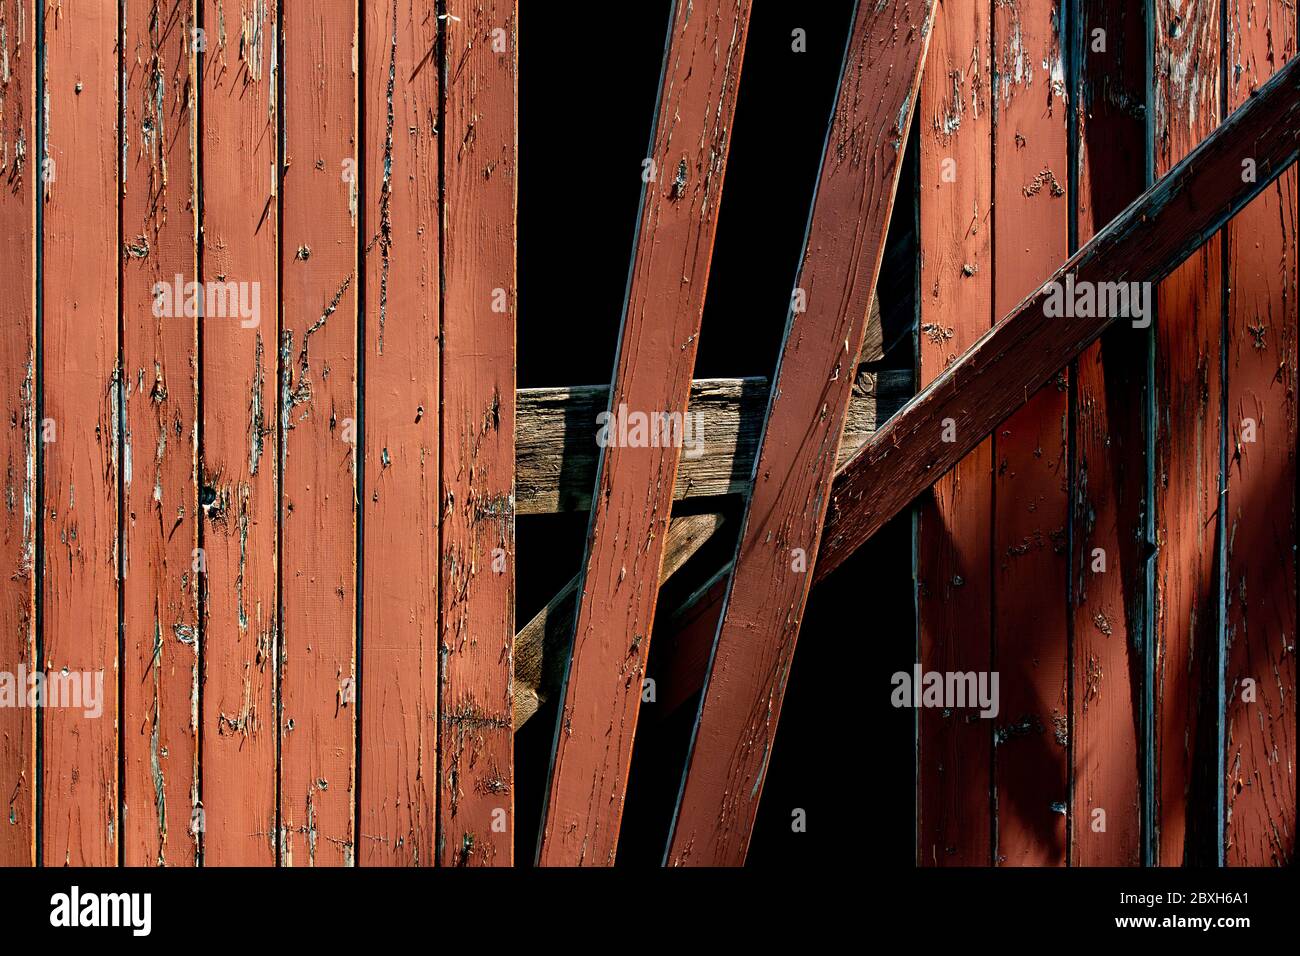 Red wooden plank wall with damaged planks hanging down Stock Photo